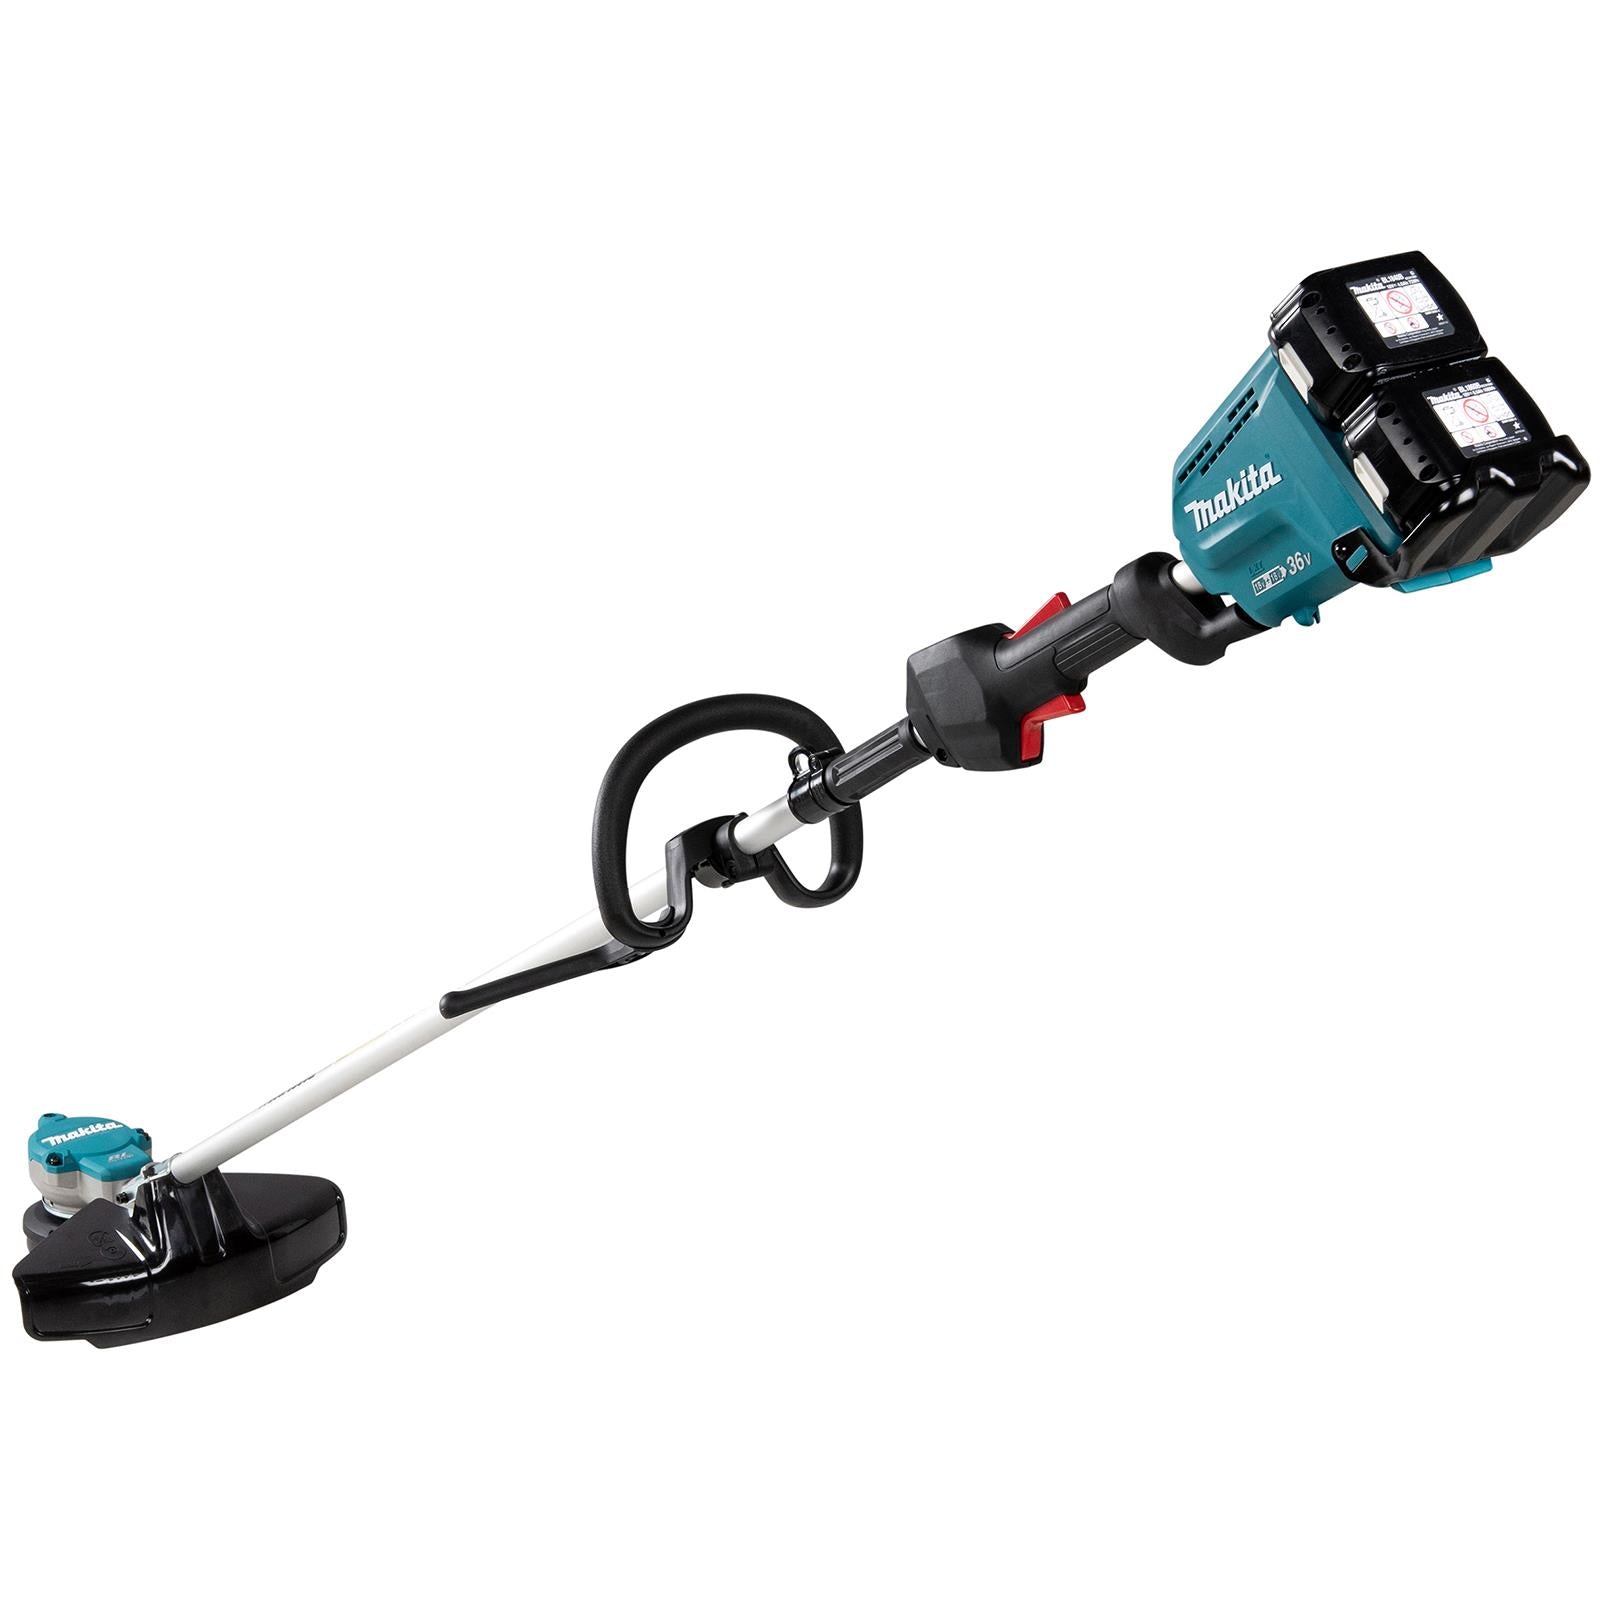 Makita Line Trimmer Strimmer Kit 2 x 18V LXT Brushless Cordless Garden Lawn Strimming 2 x 6Ah Battery and Dual Rapid Charger DUR368APG2